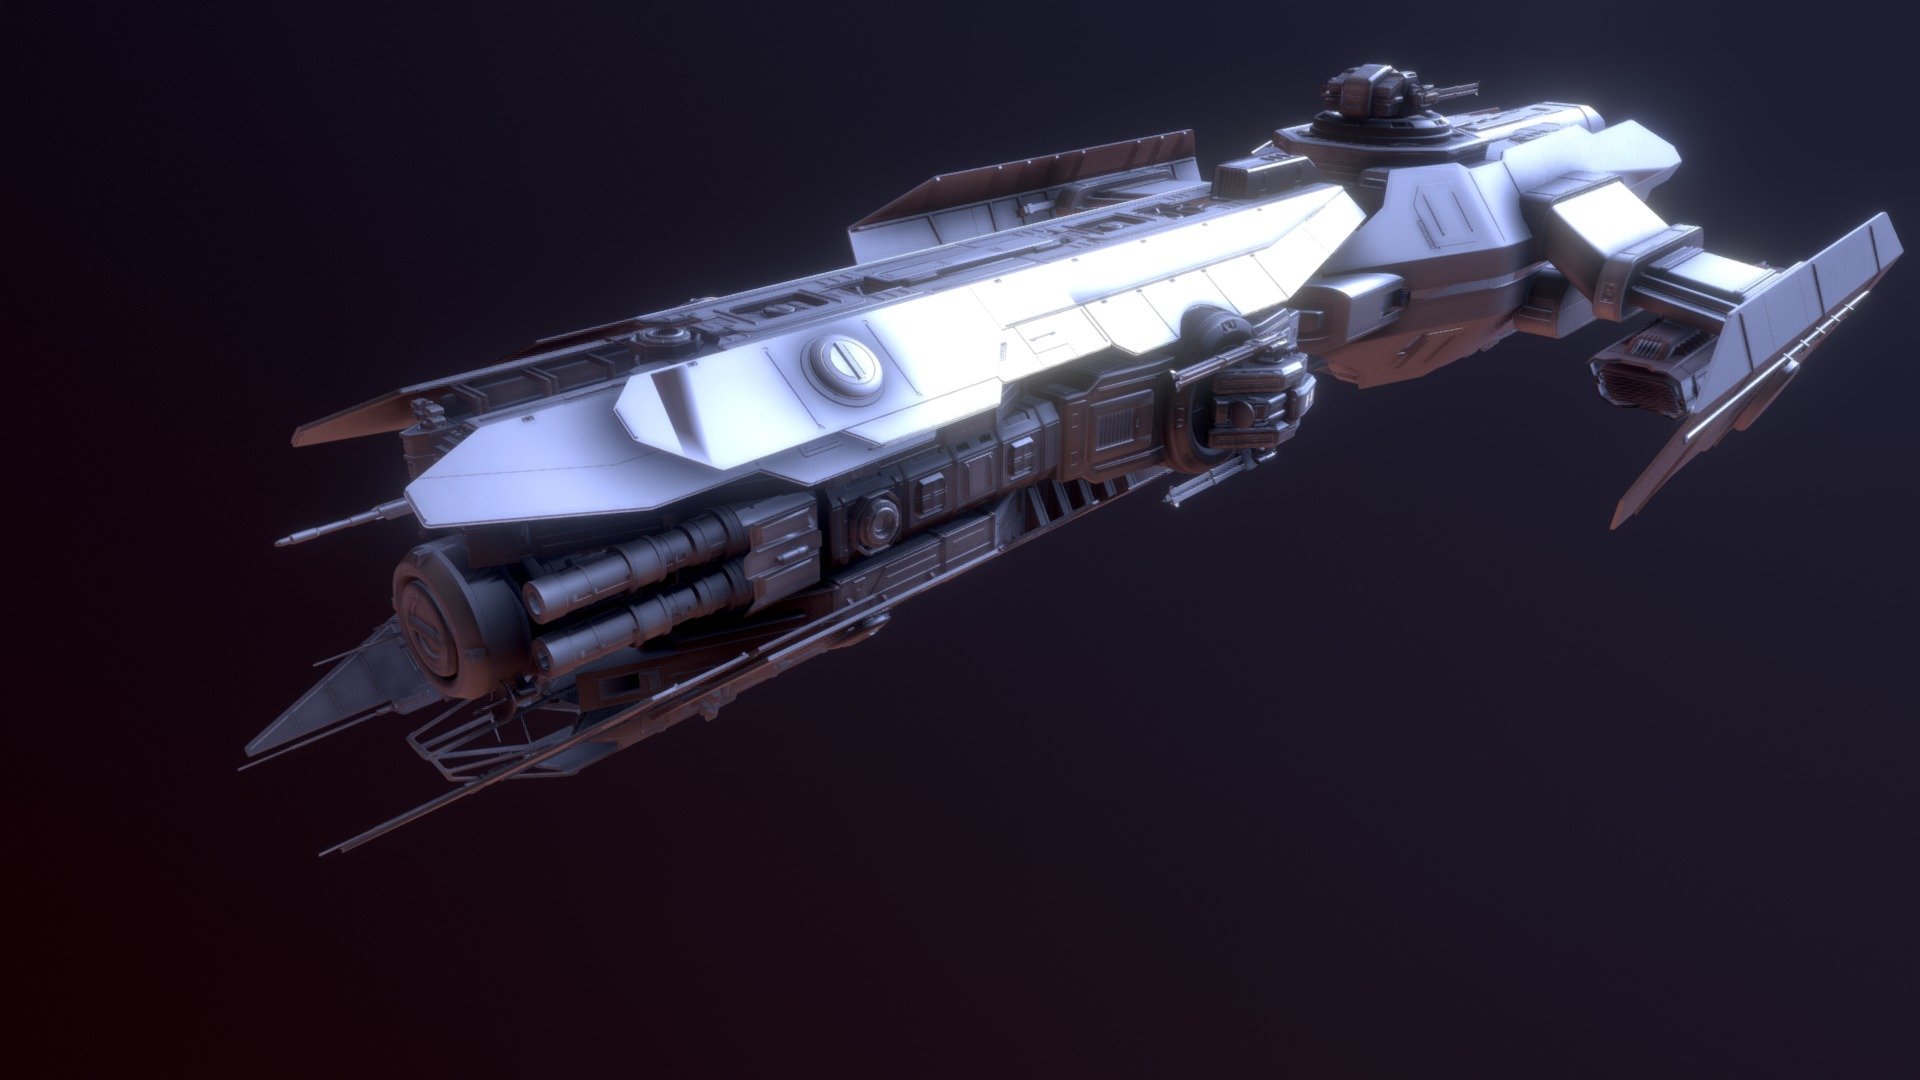 rough wip of a star citizen concept of my own
really rough export mesh ..working on front section..and other parts
like this :https://sketchfab.com/models/fc3f59d0ad1542a79a7309a56f589902 - Drake: Arrow Bomber - 3D model by Dhilon (@atum) 3d model